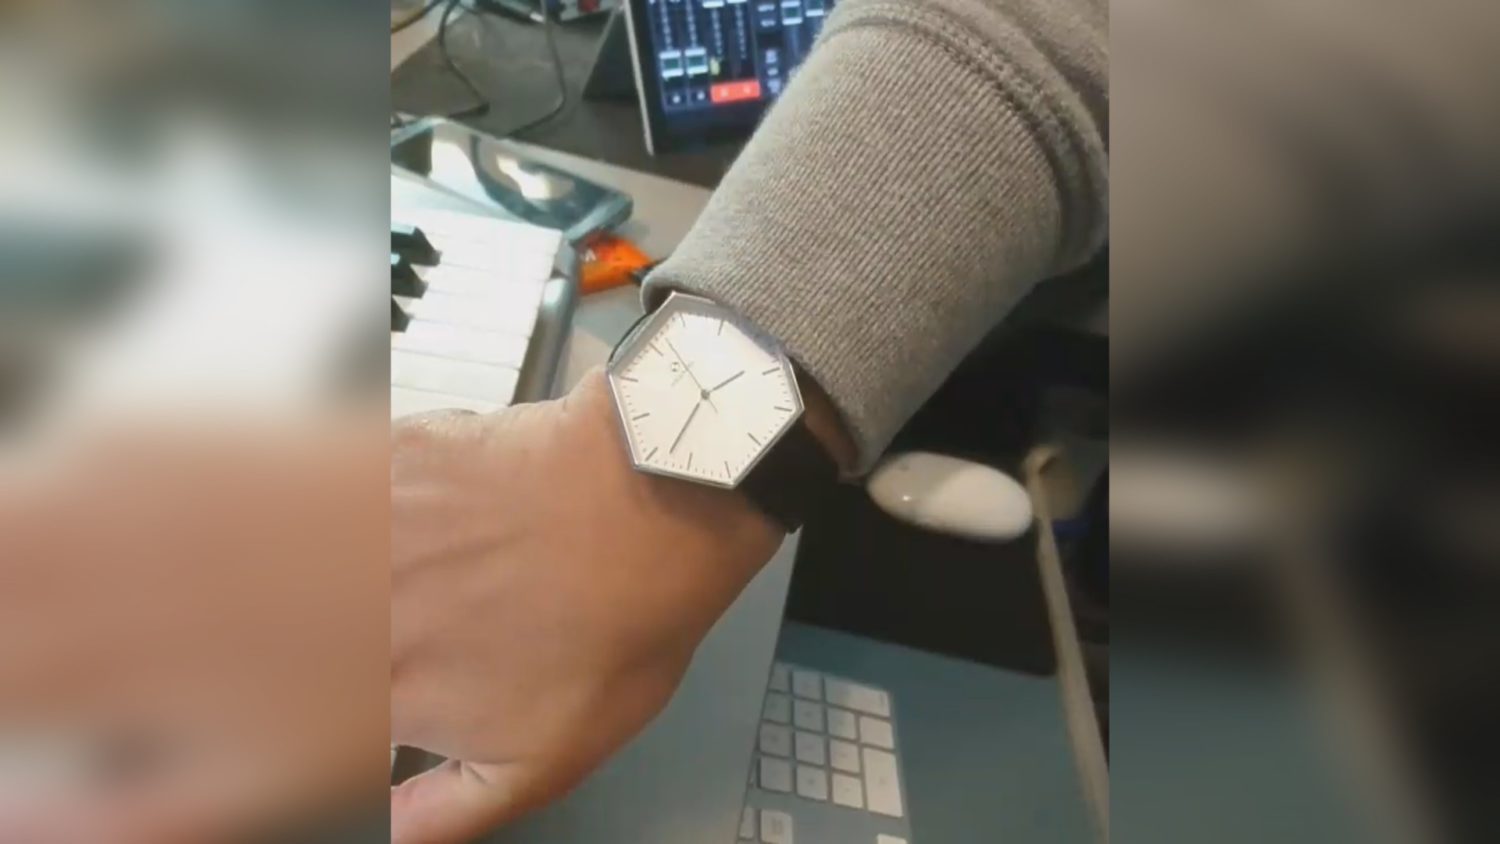 Anthony wears the Hexwatch